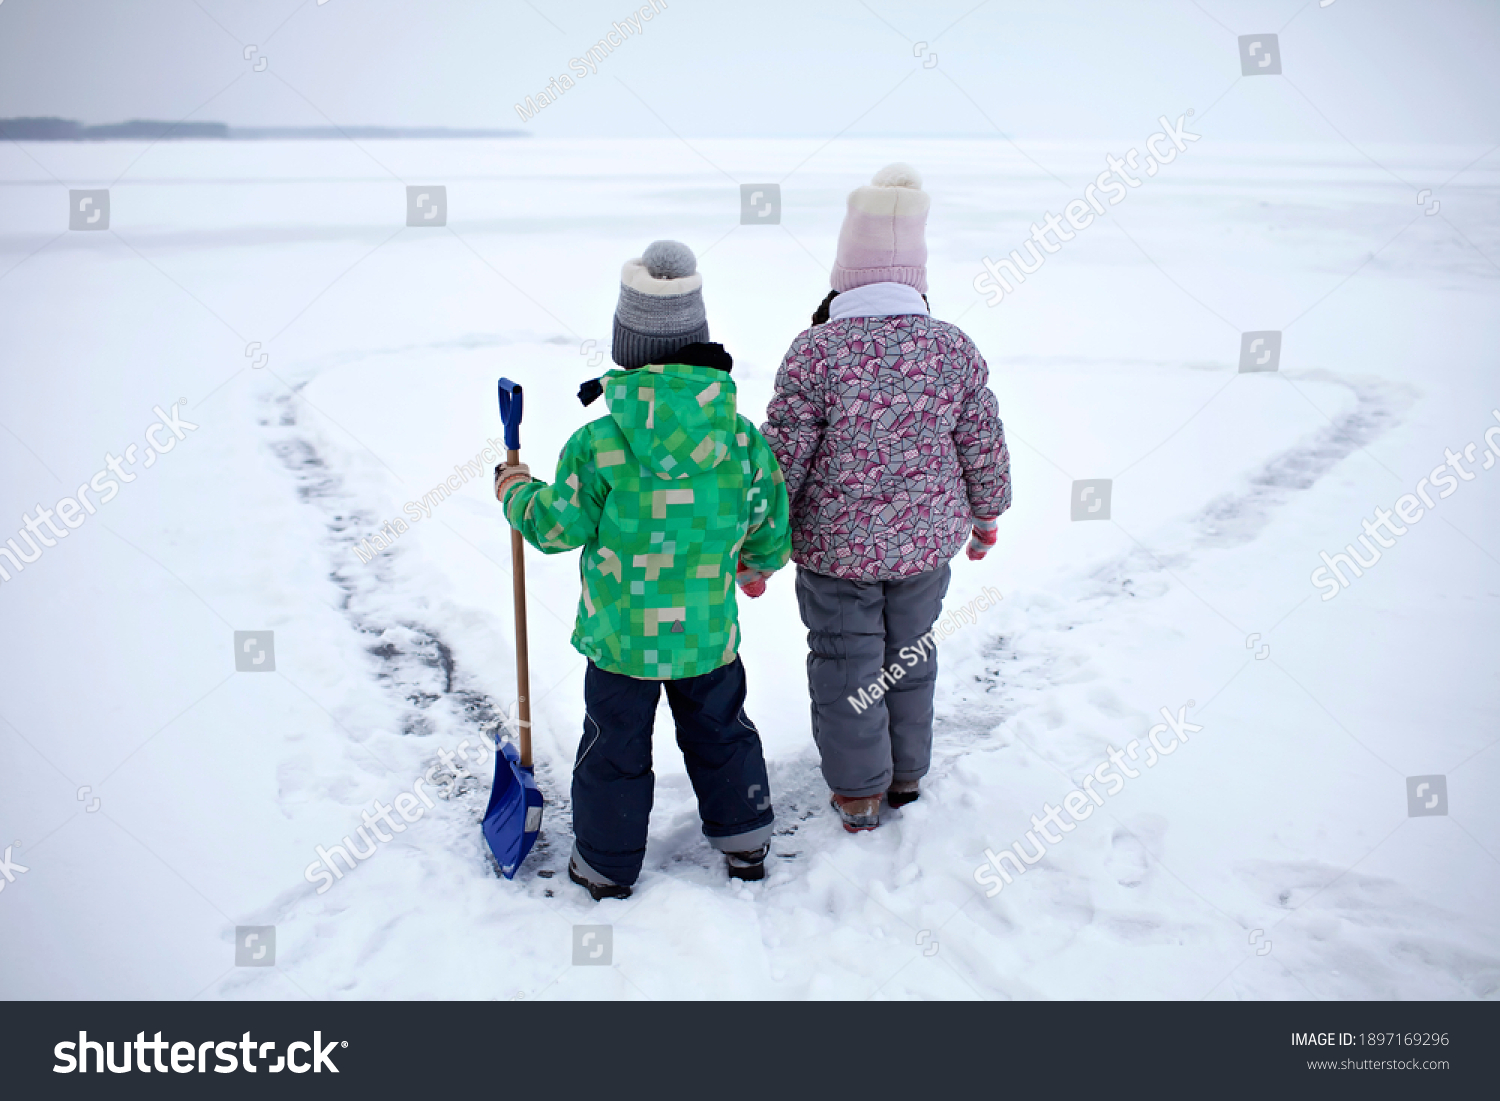 Boy and girl have fun and removing snow from the ice on the frozen lake in heart shape. Winter romantic, silence and wild nature, active winter weekend, outdoor activities, icy landscape, lifestyle #1897169296